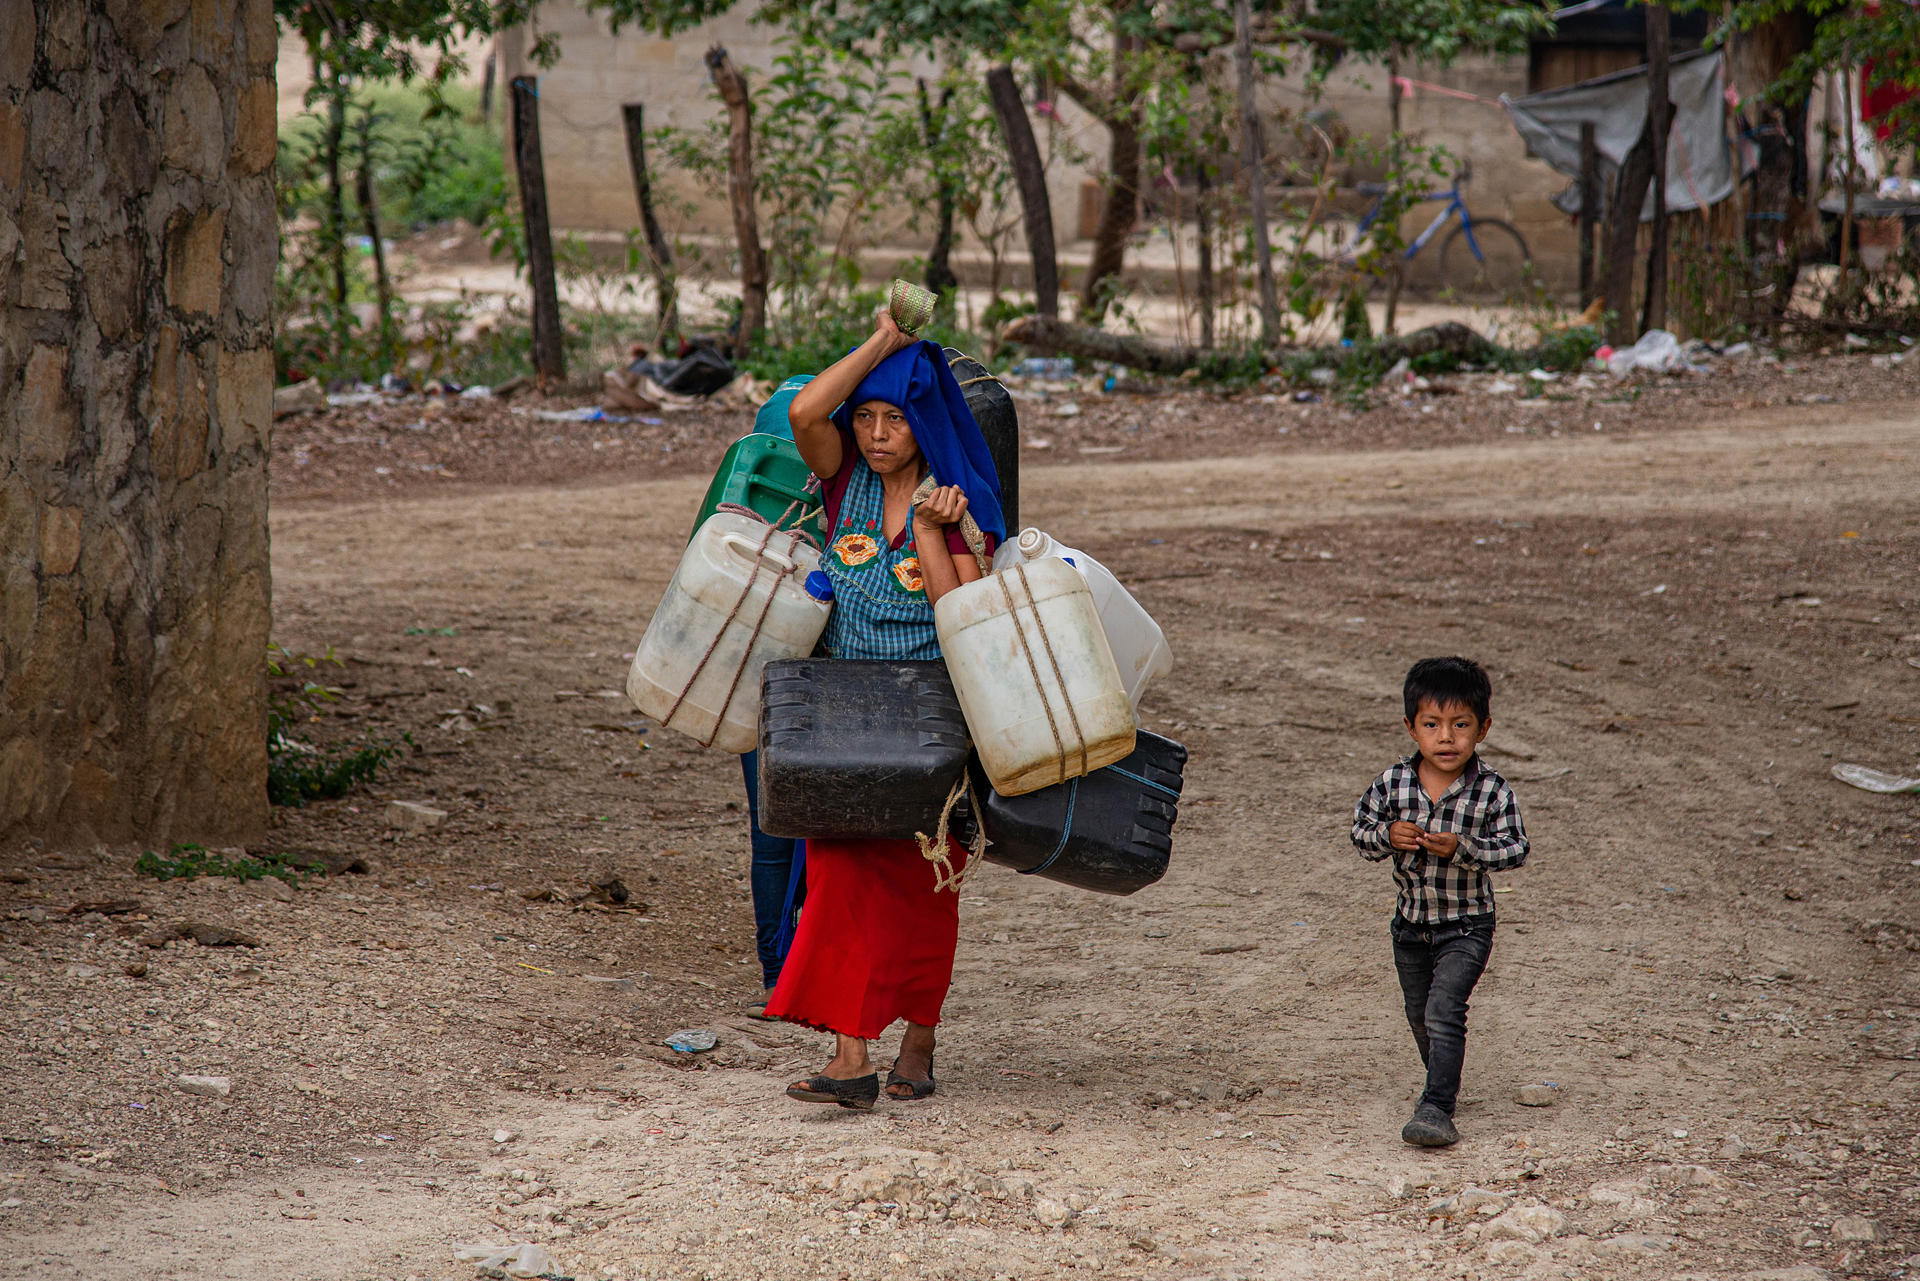 A Tzotzil Maya resident of the community of Guadalupe Xu’kun, located in the southeastern Mexican state of Chiapas, on 22 June 2023 carries a container of water that she filled in the nearby town of Zinacantan. EFE/Carlos Lopez
